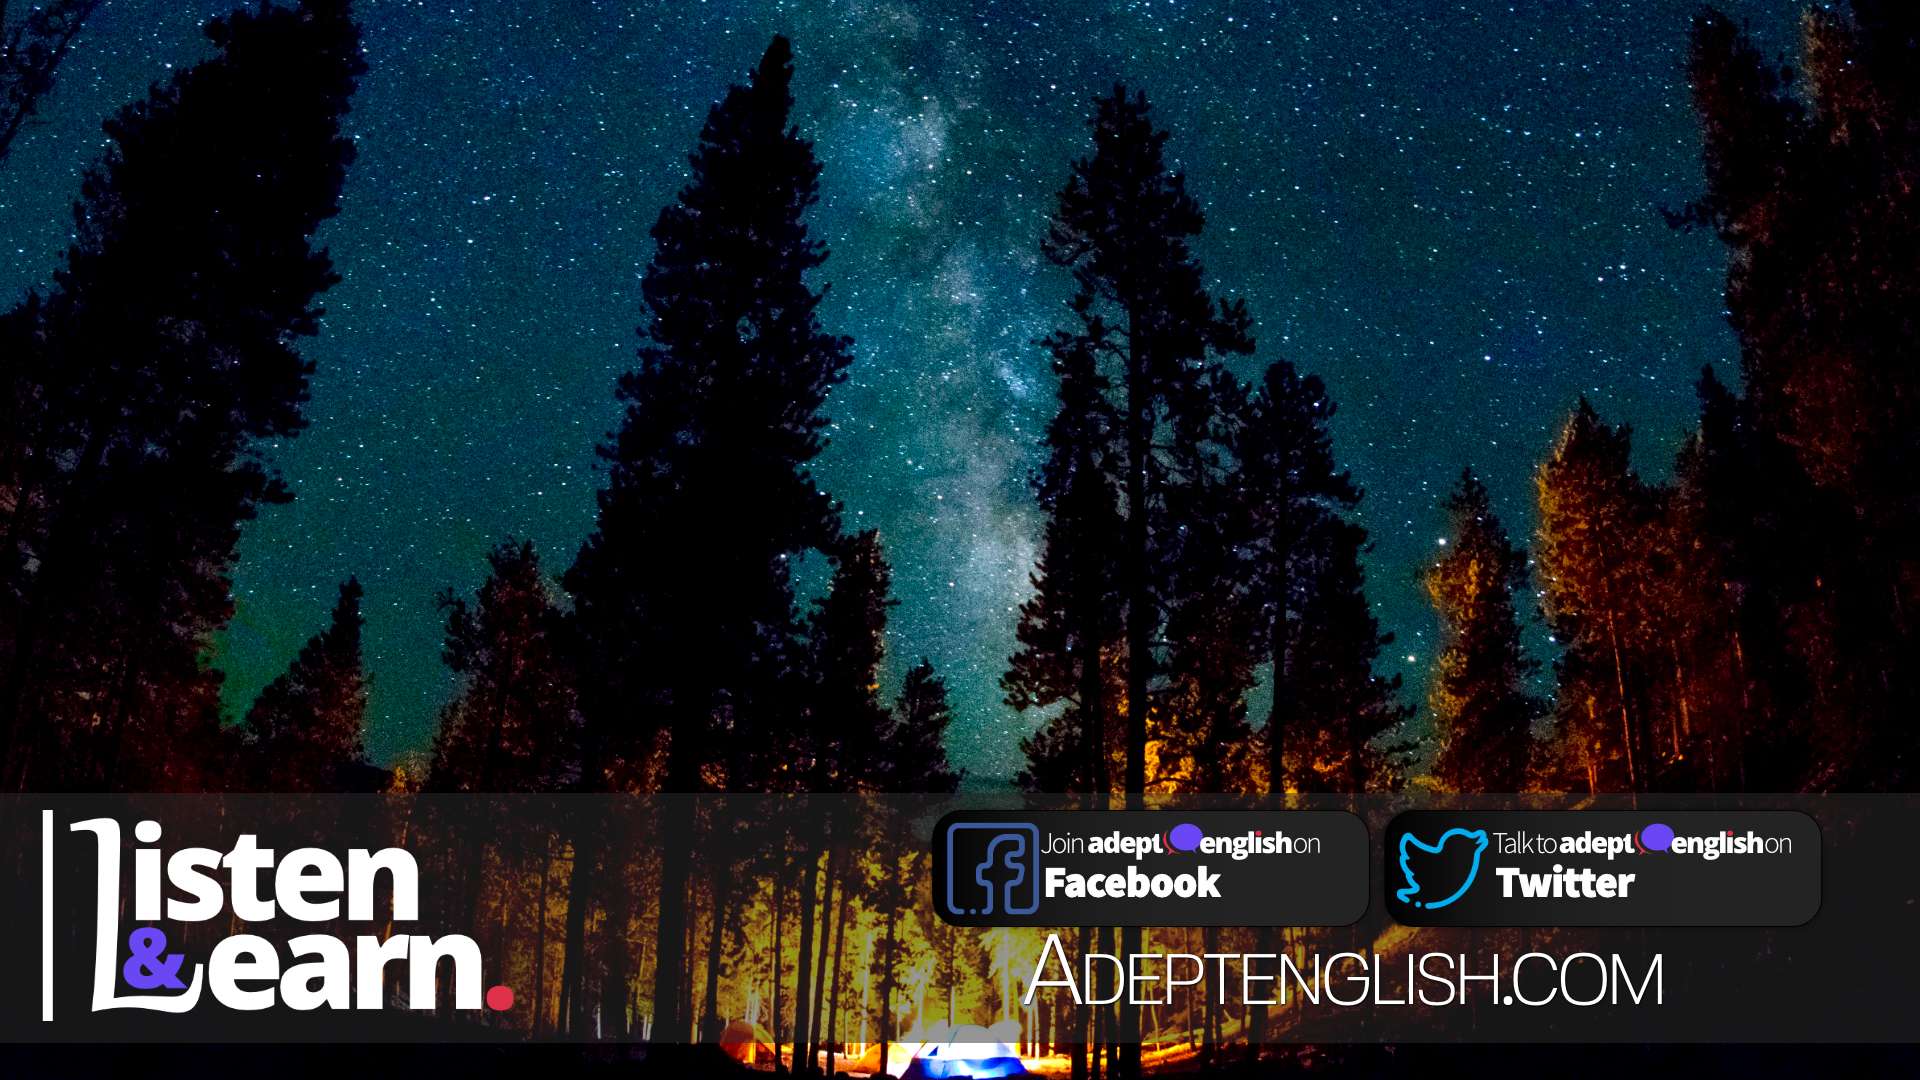 A magnificent photograph of the stars at night from a camping site in a forest. Learning more than just how to speak English fluently.